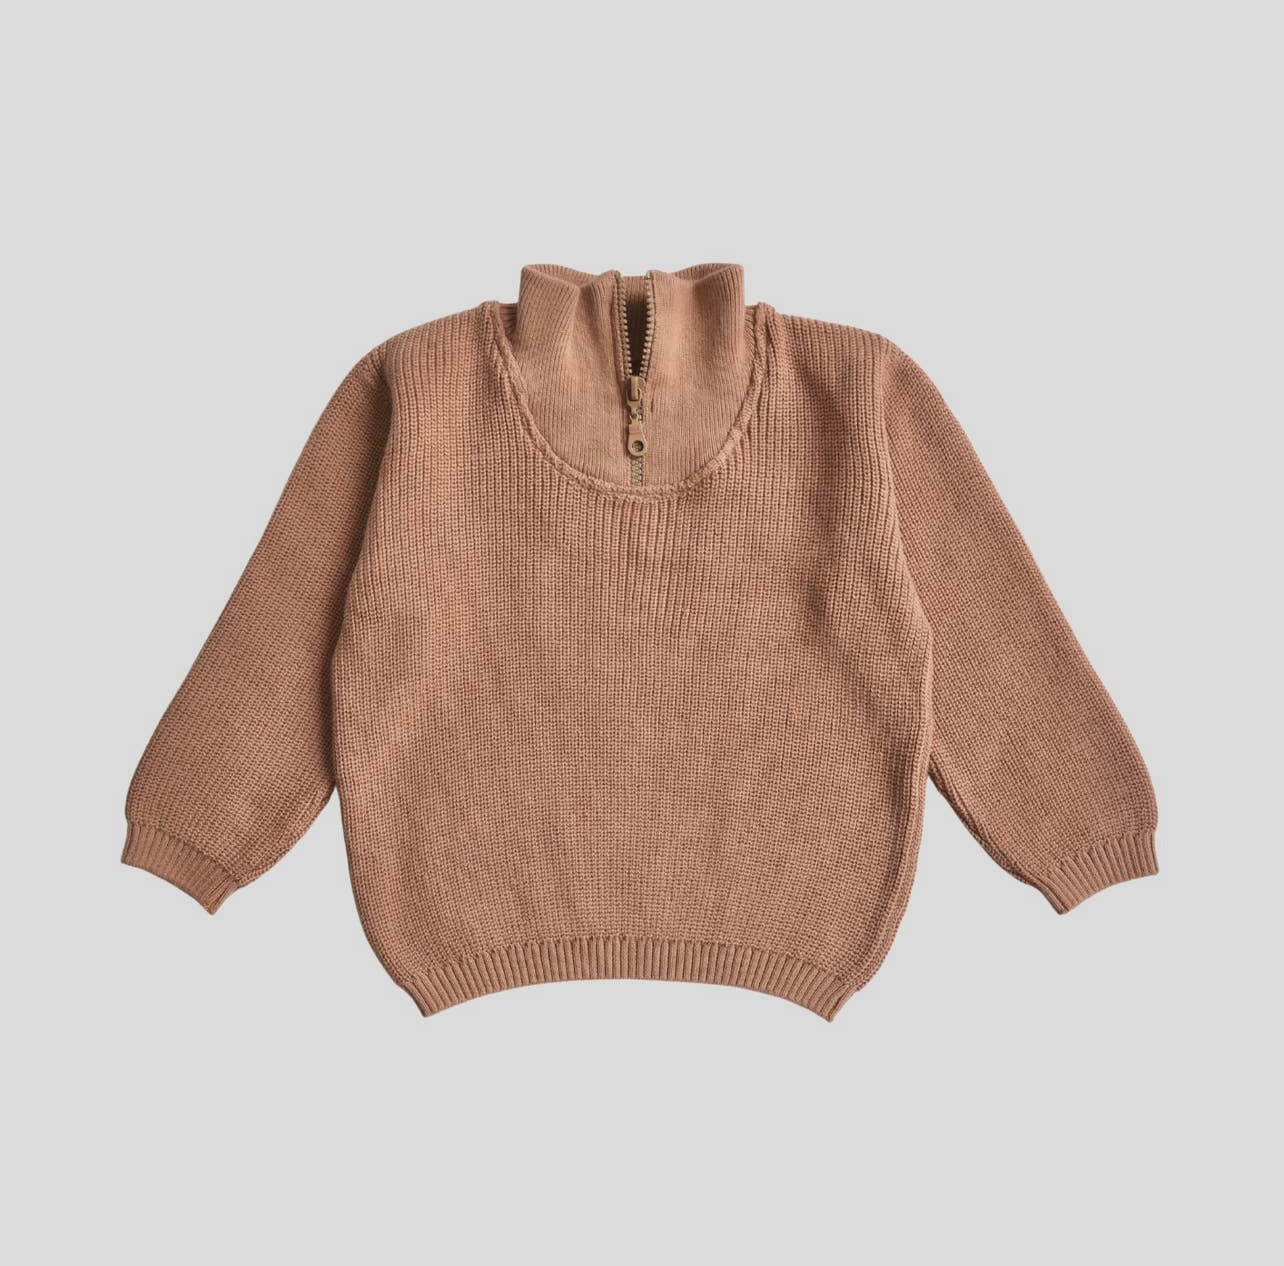 Toddler Neutral Sweater